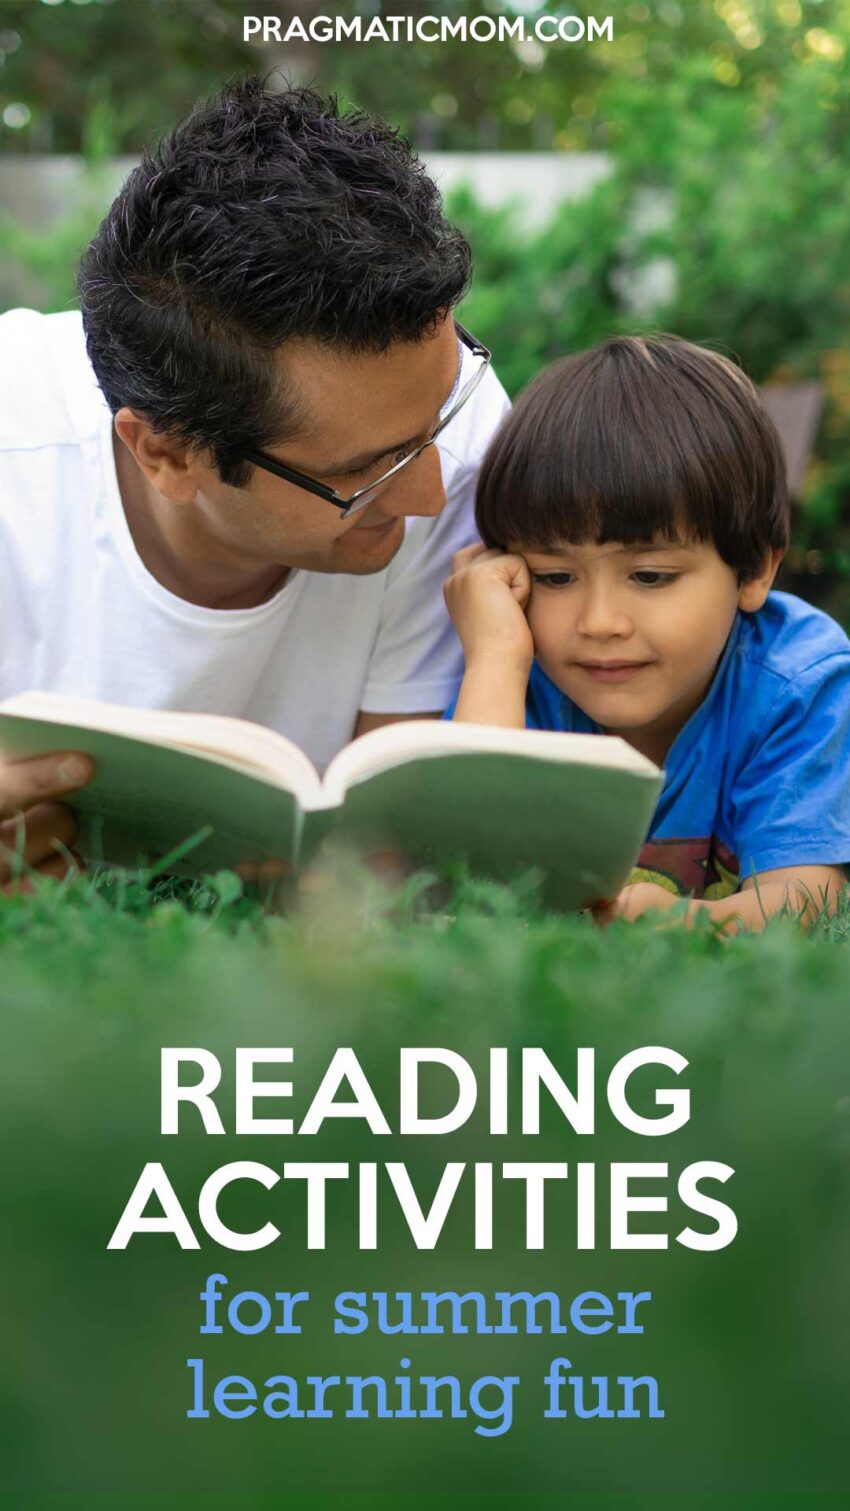 Reading Activities for Summer Learning Fun